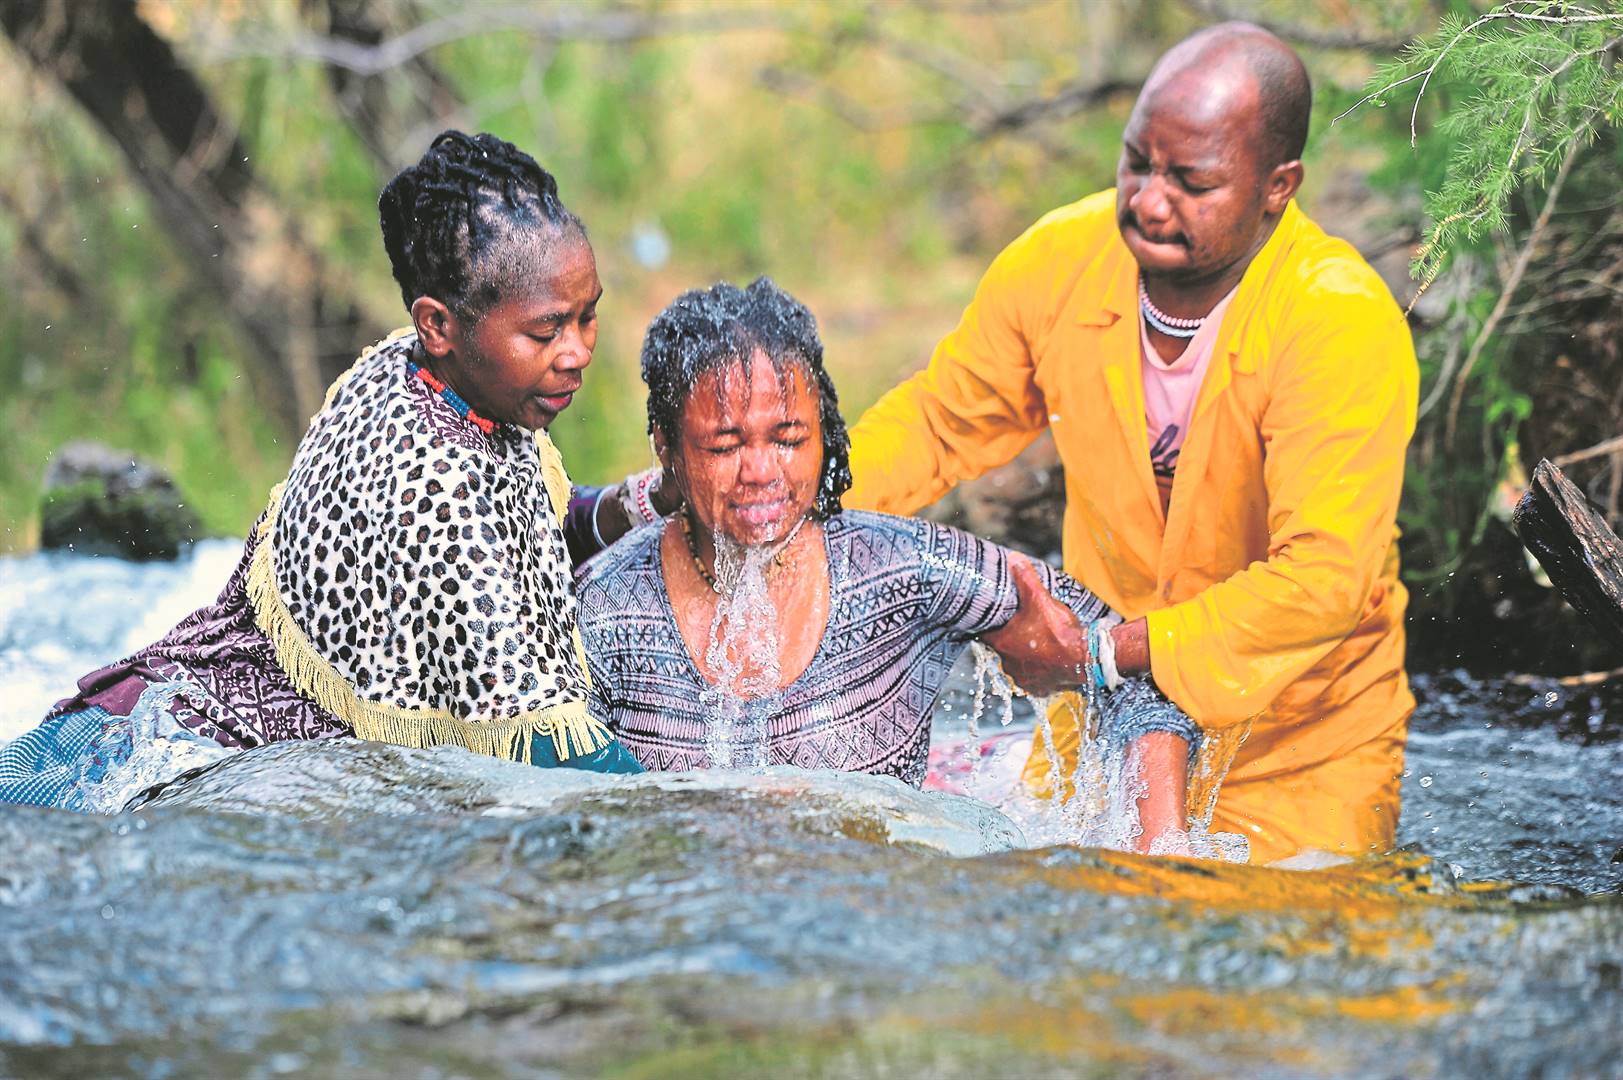 The Way Of Water: Gogos Bhubesi and Simamkele perform a cleansing ceremony in a river in Lawley, south of Lenasia in Gauteng